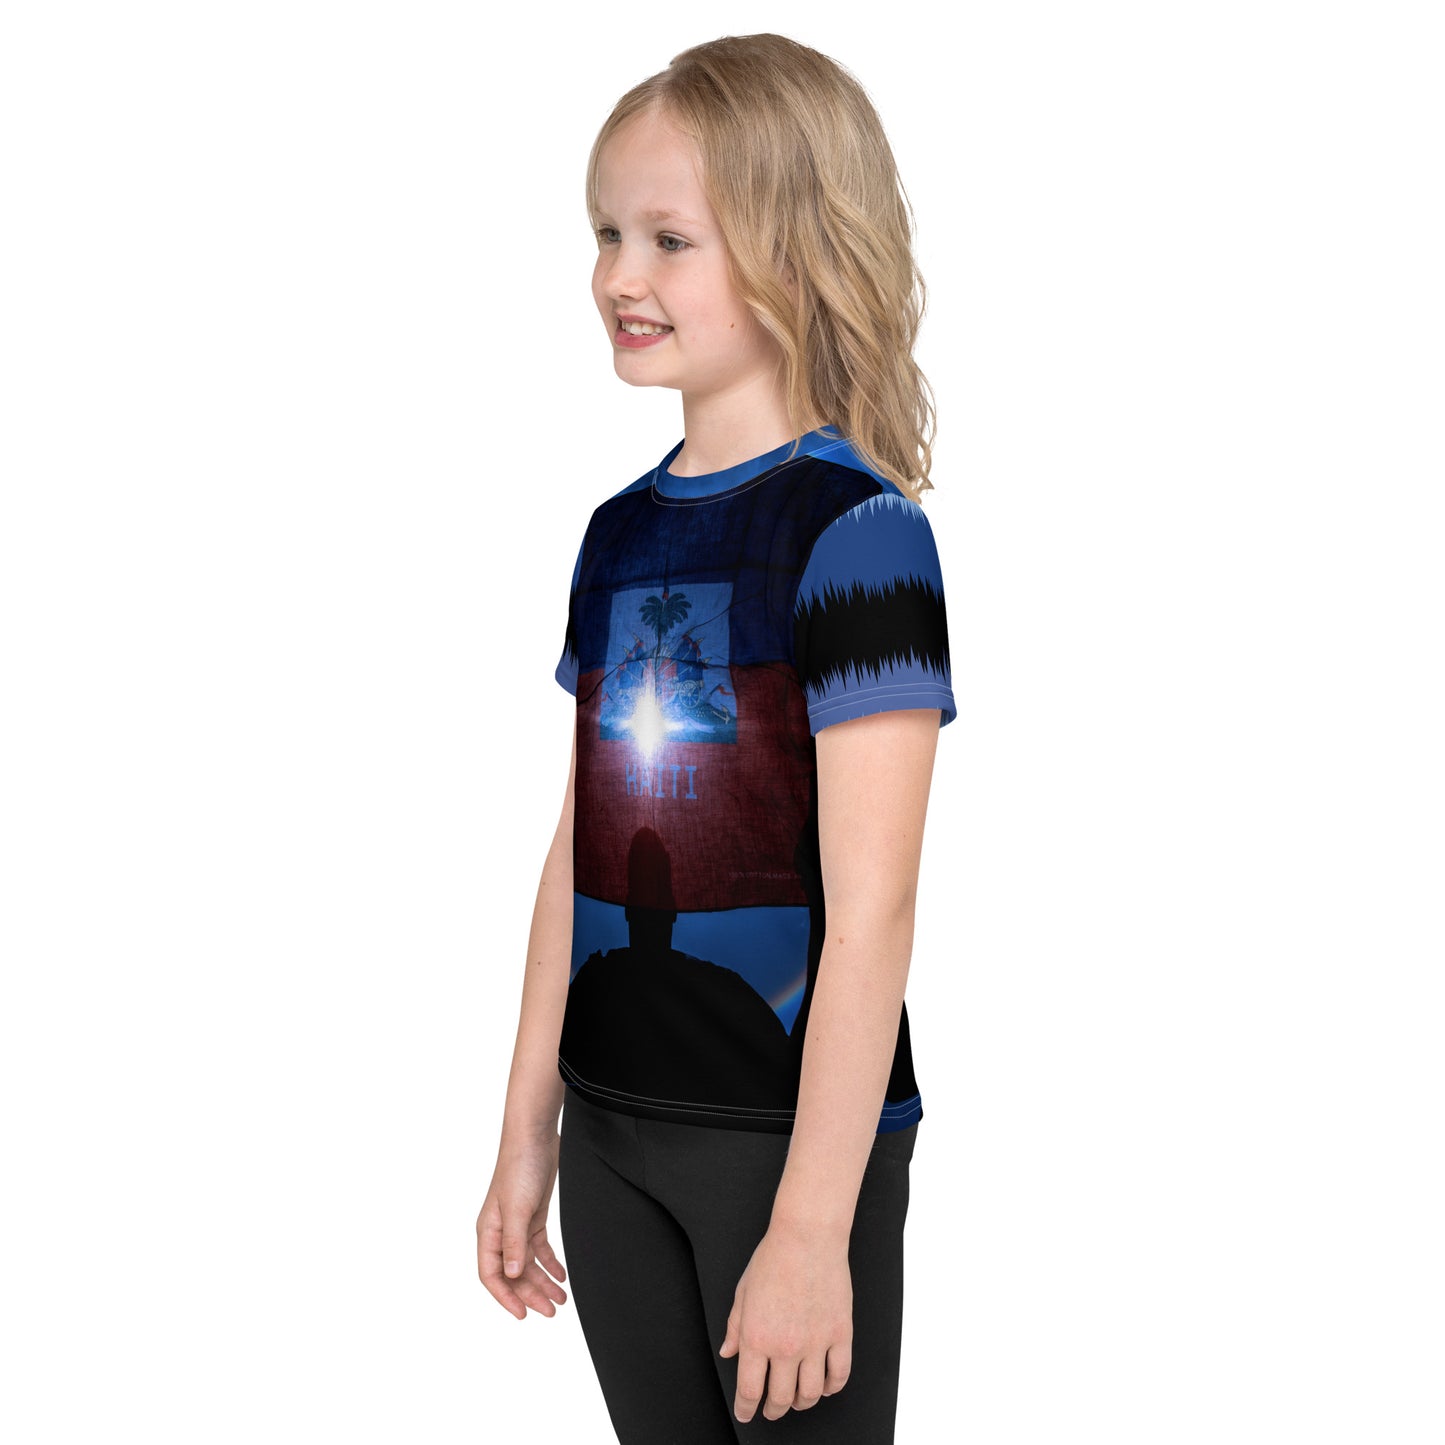 Kids crew neck t-shirt ( The Halo Collection )